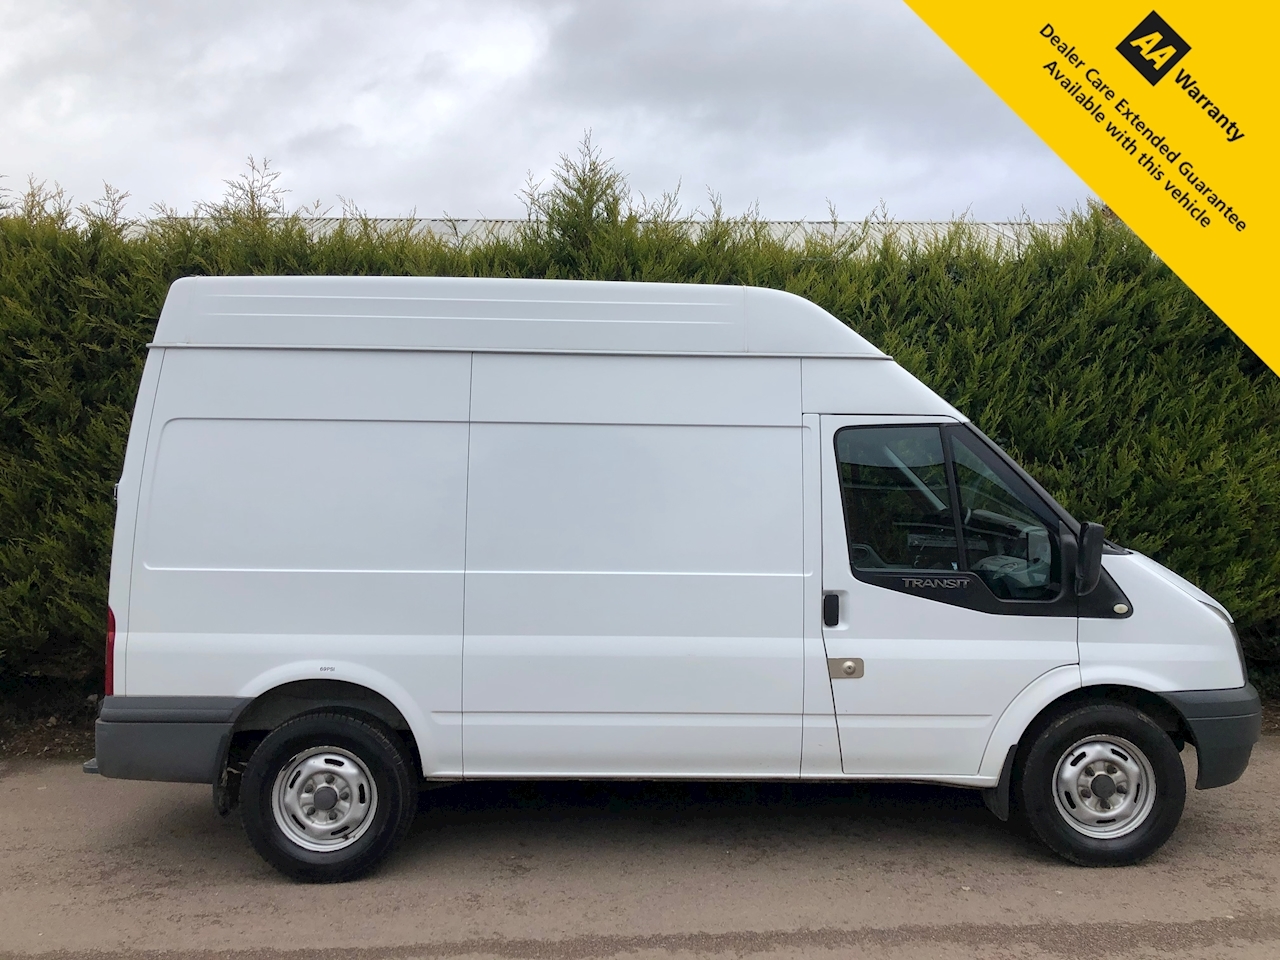 mwb van for sale off 60% - online-sms.in